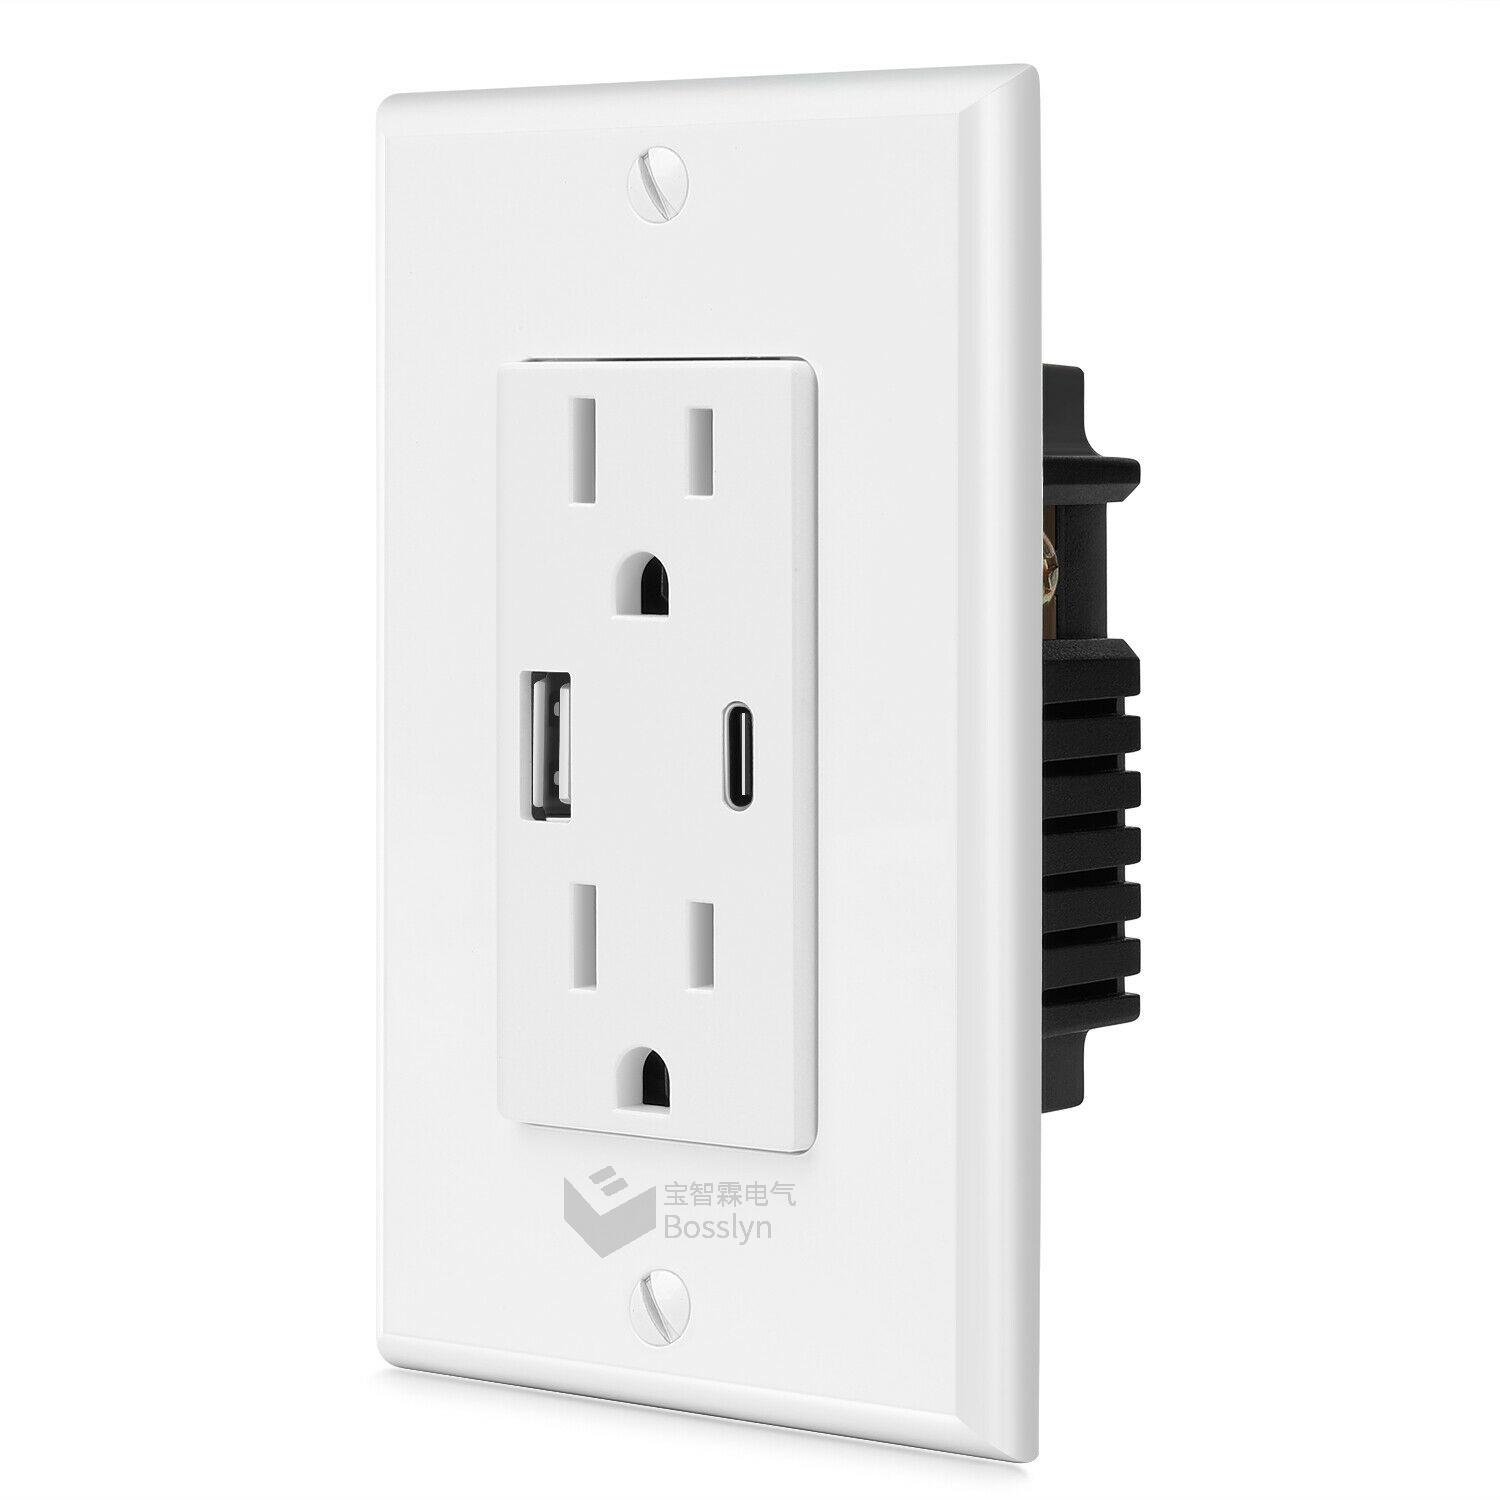 BOSSLYN UL Type C & Type A 4.8A 5V USB Outlets 15A Tamper Resistant Receptacle 2